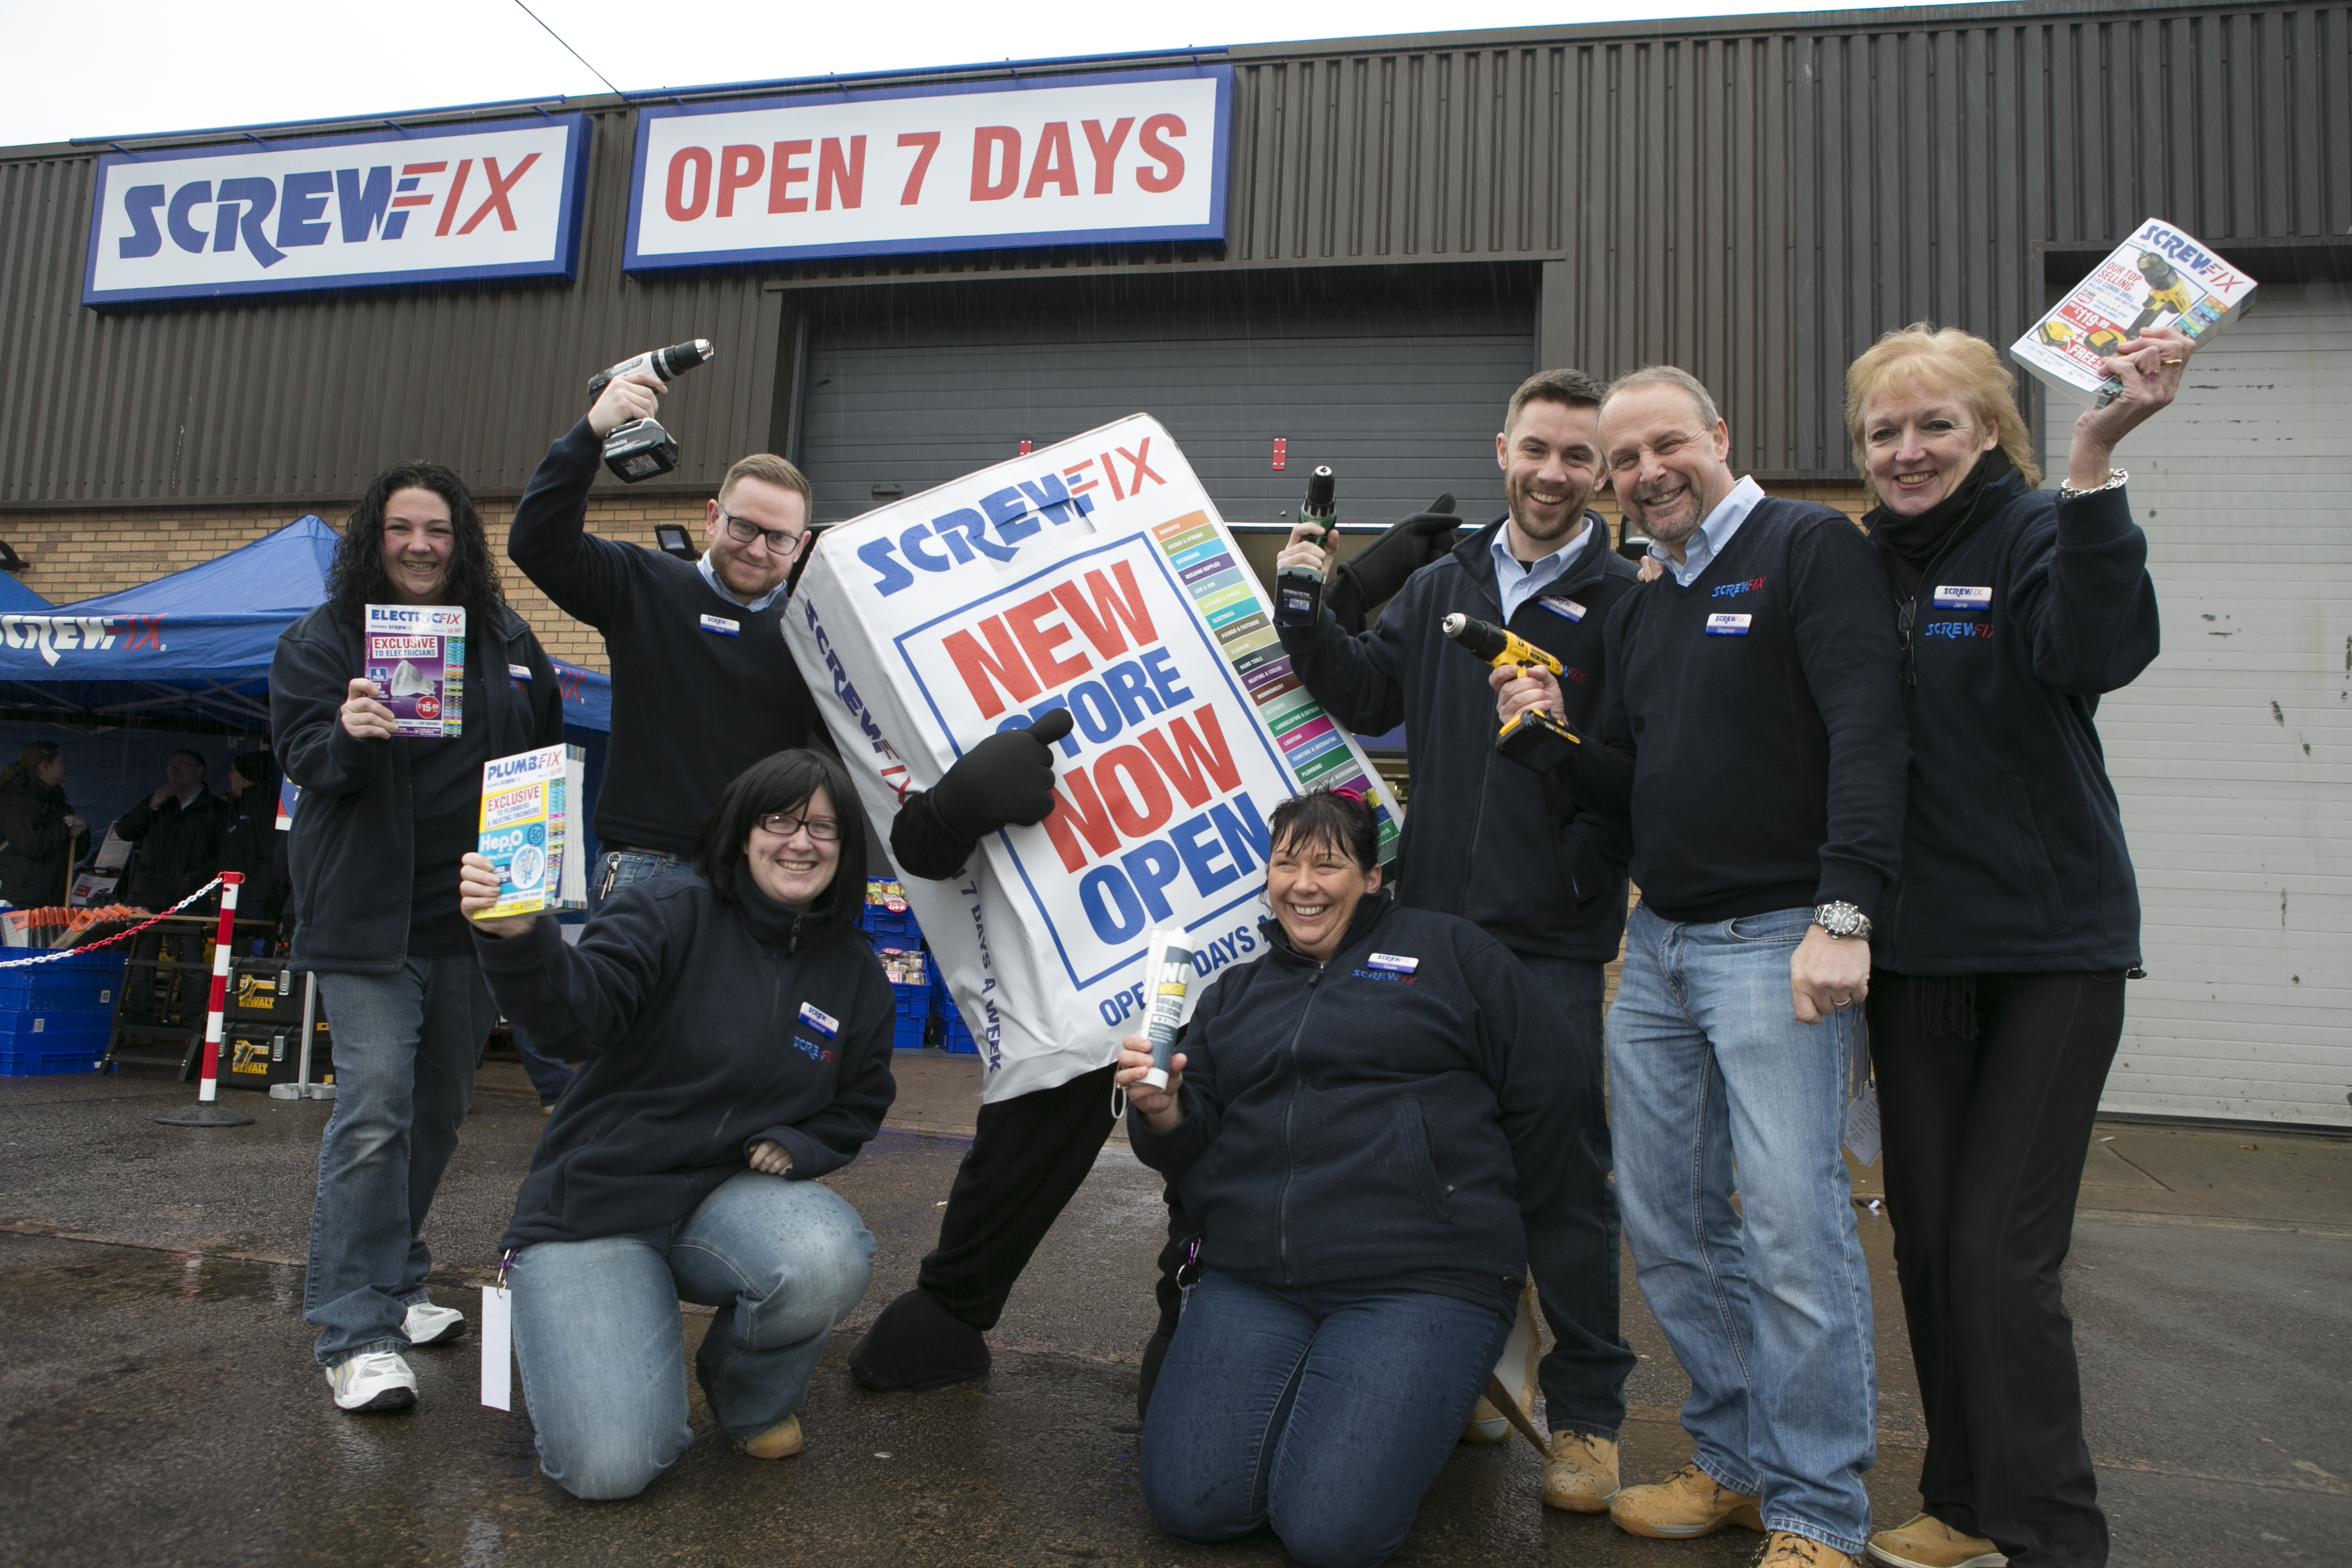 Cardiff’s fourth Screwfix store is declared a runaway success